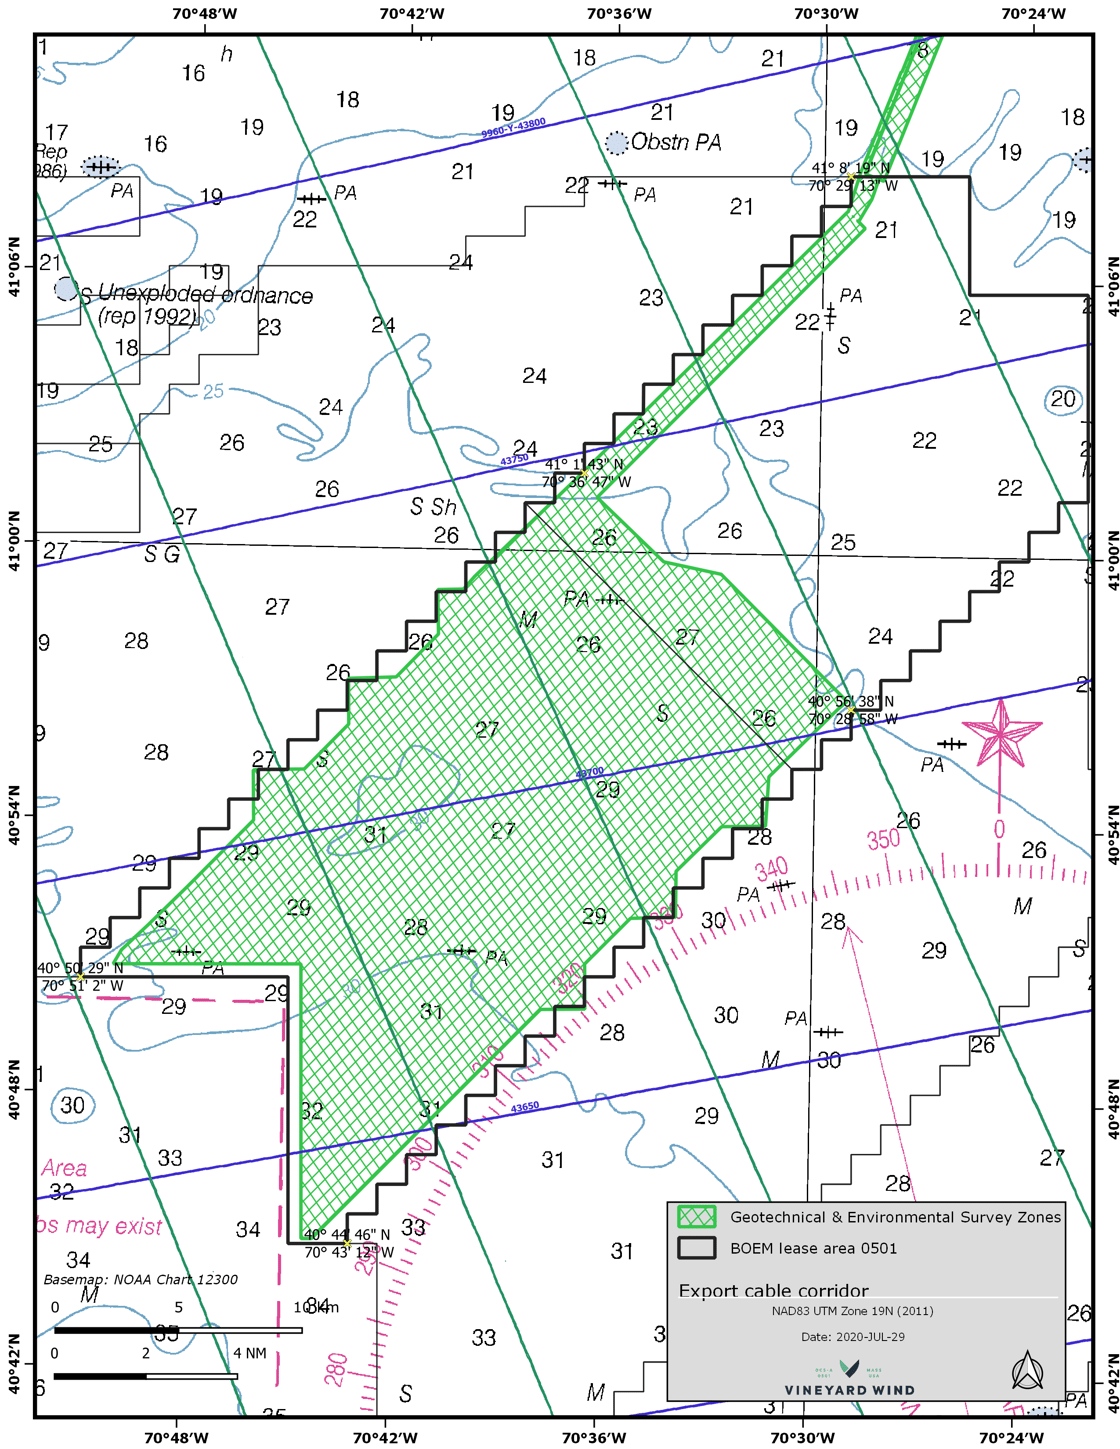 Southern portion of Vineyard Wind Lease Area 0501